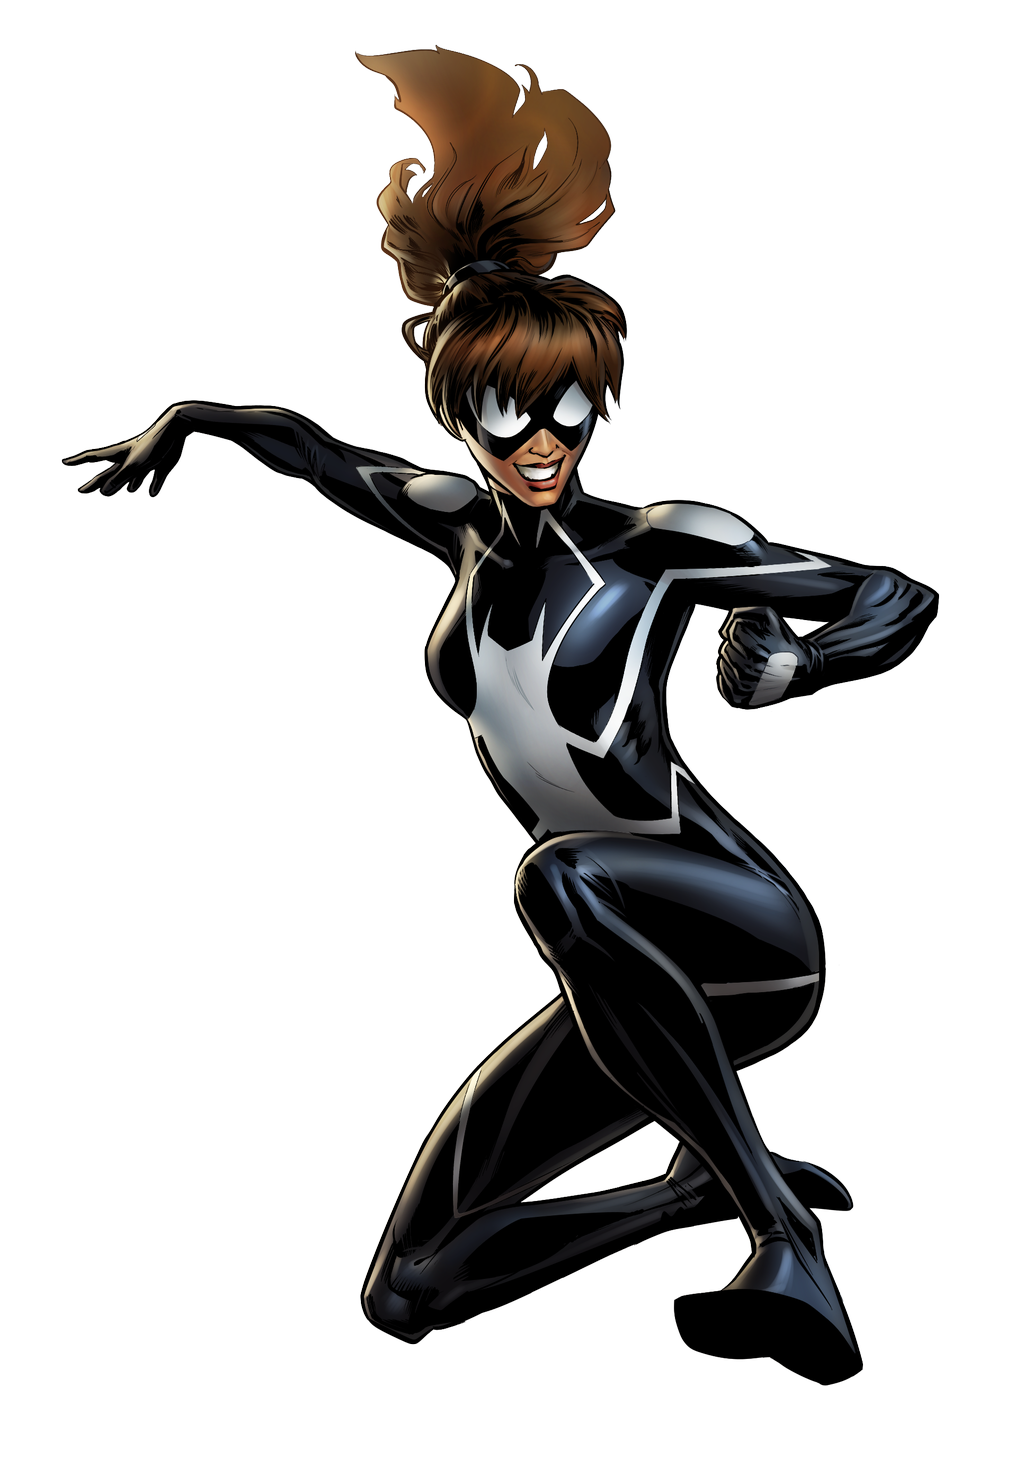 http://vignette2.wikia.nocookie.net/avengersalliance/images/a/ae/Spider-Girl_Portrait_Art.png/revision/latest?cb=20150711010249